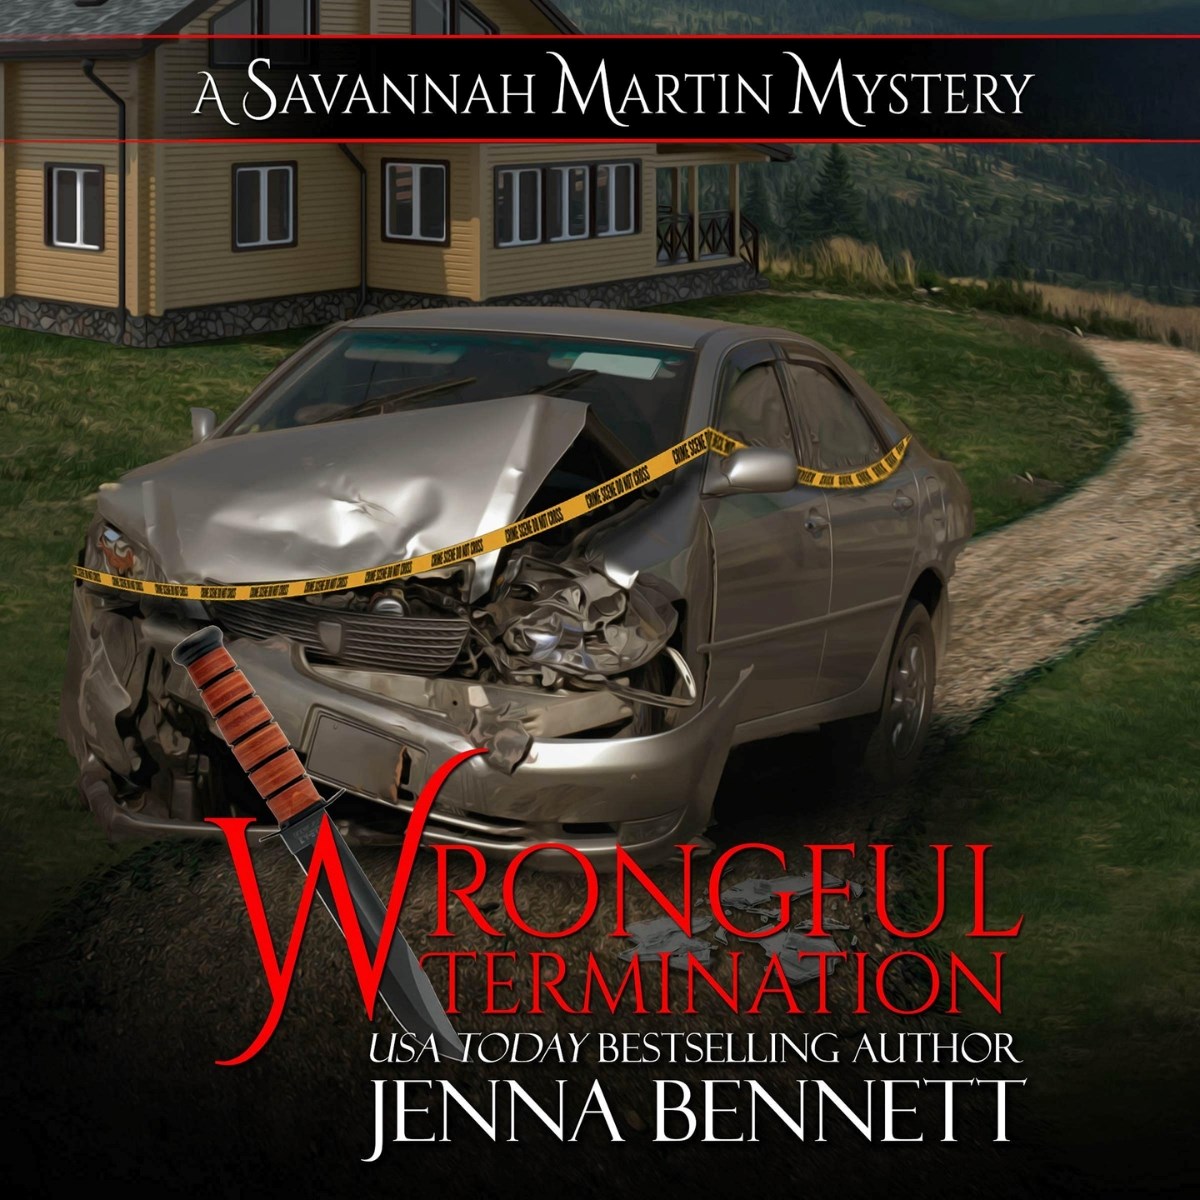 13 Superior Savannah Martin Mysteries In Kindle for 2023